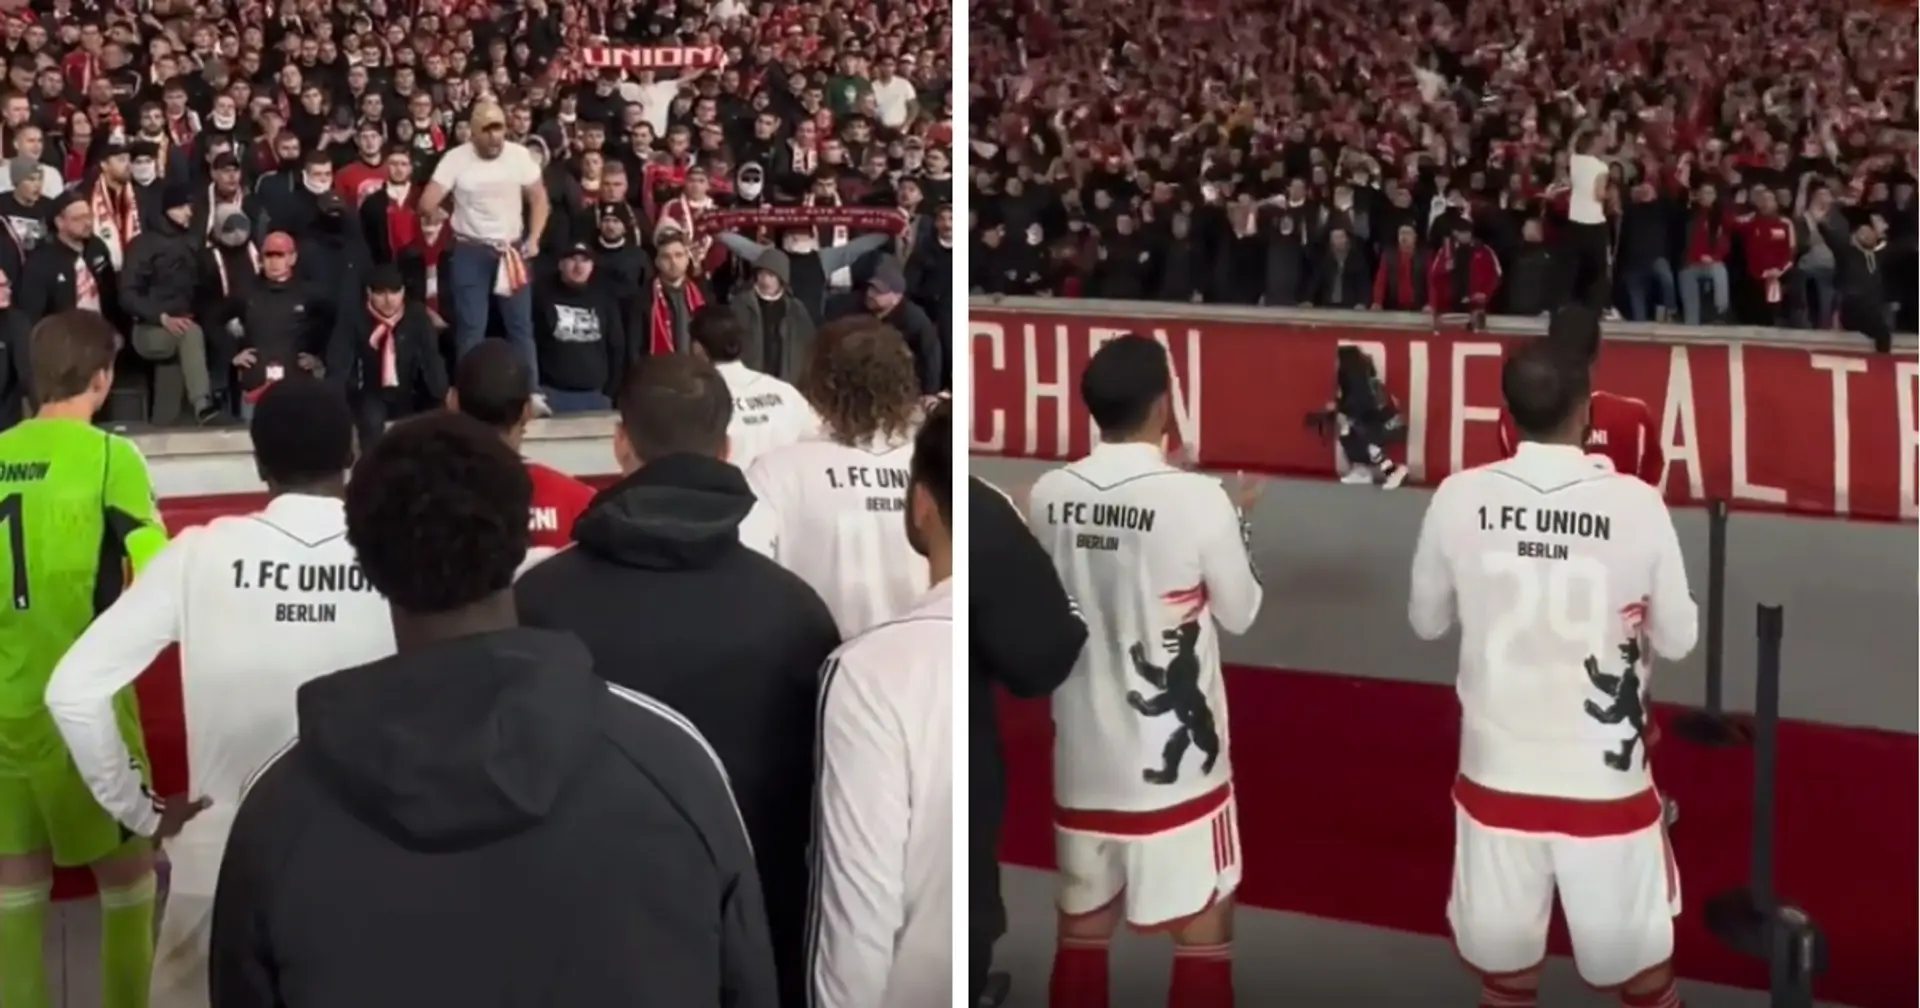 'You played very well': Union Berlin fans address players after 9th defeat in a row